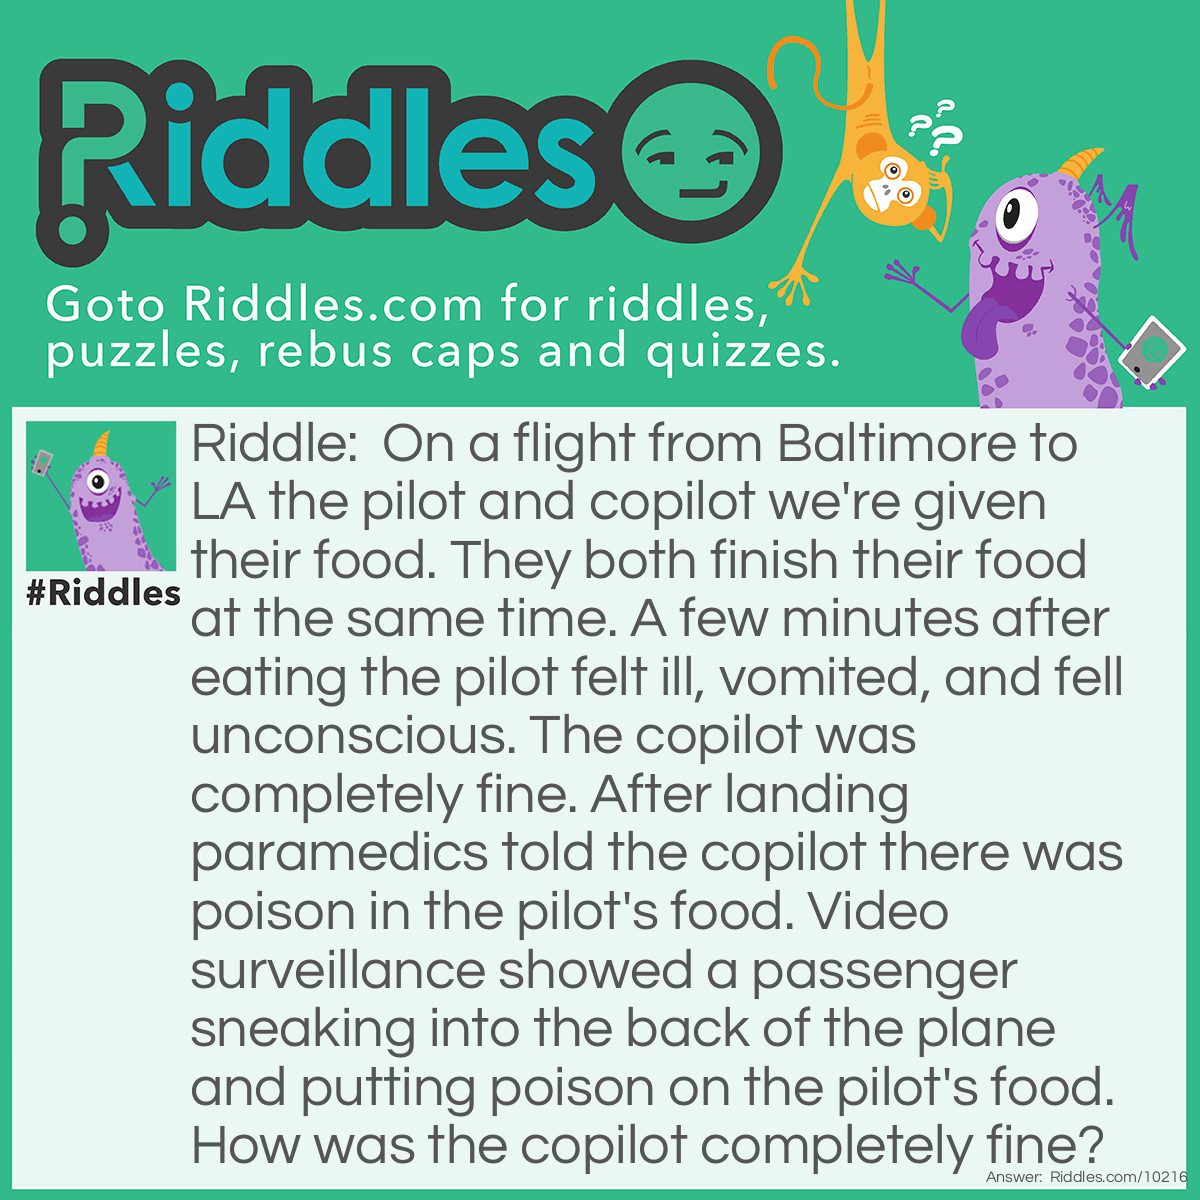 Riddle: On a flight from Baltimore to LA the pilot and copilot we're given their food. They both finish their food at the same time. A few minutes after eating the pilot felt ill, vomited, and fell unconscious. The copilot was completely fine. After landing paramedics told the copilot there was poison in the pilot's food. Video surveillance showed a passenger sneaking into the back of the plane and putting poison on the pilot's food. How was the copilot completely fine? Answer: The passenger thought the pilot and copilot would eat the same meal, so the passenger only poisoned the pilot's meal. On airplanes the pilot and copilot are given different meals. That way if the pilot's food is bad, the copilot can take over and vice versa.